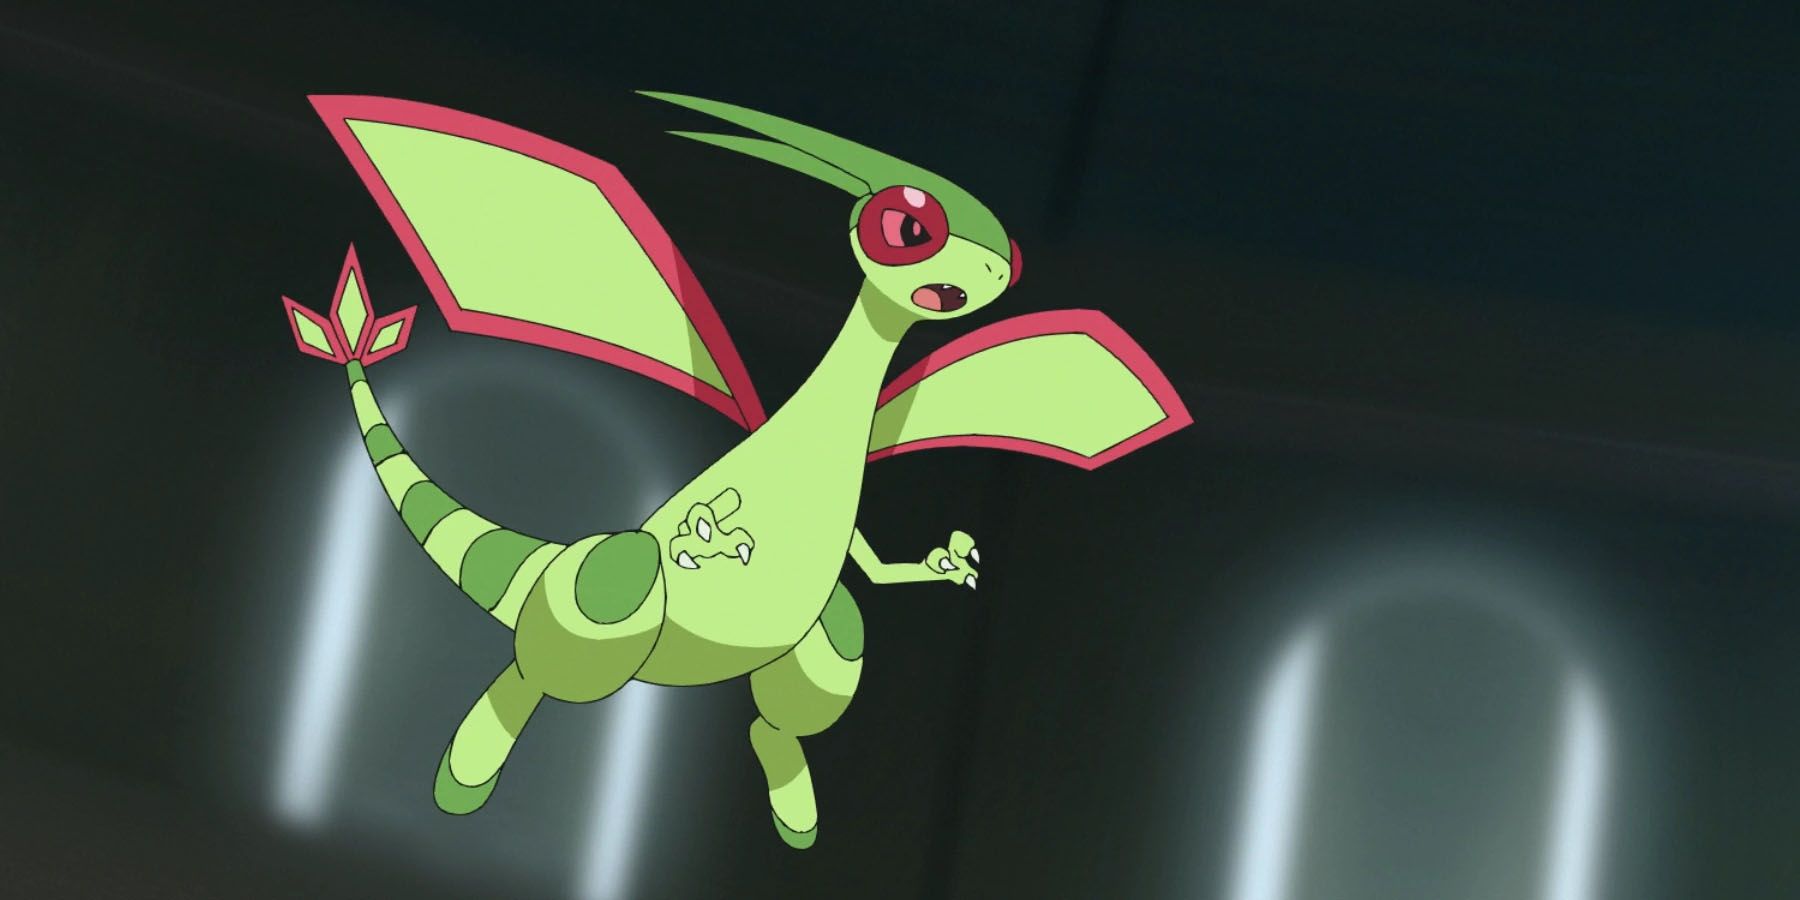 A screenshot of Flygon flying in a dark room in the Pokemon anime.